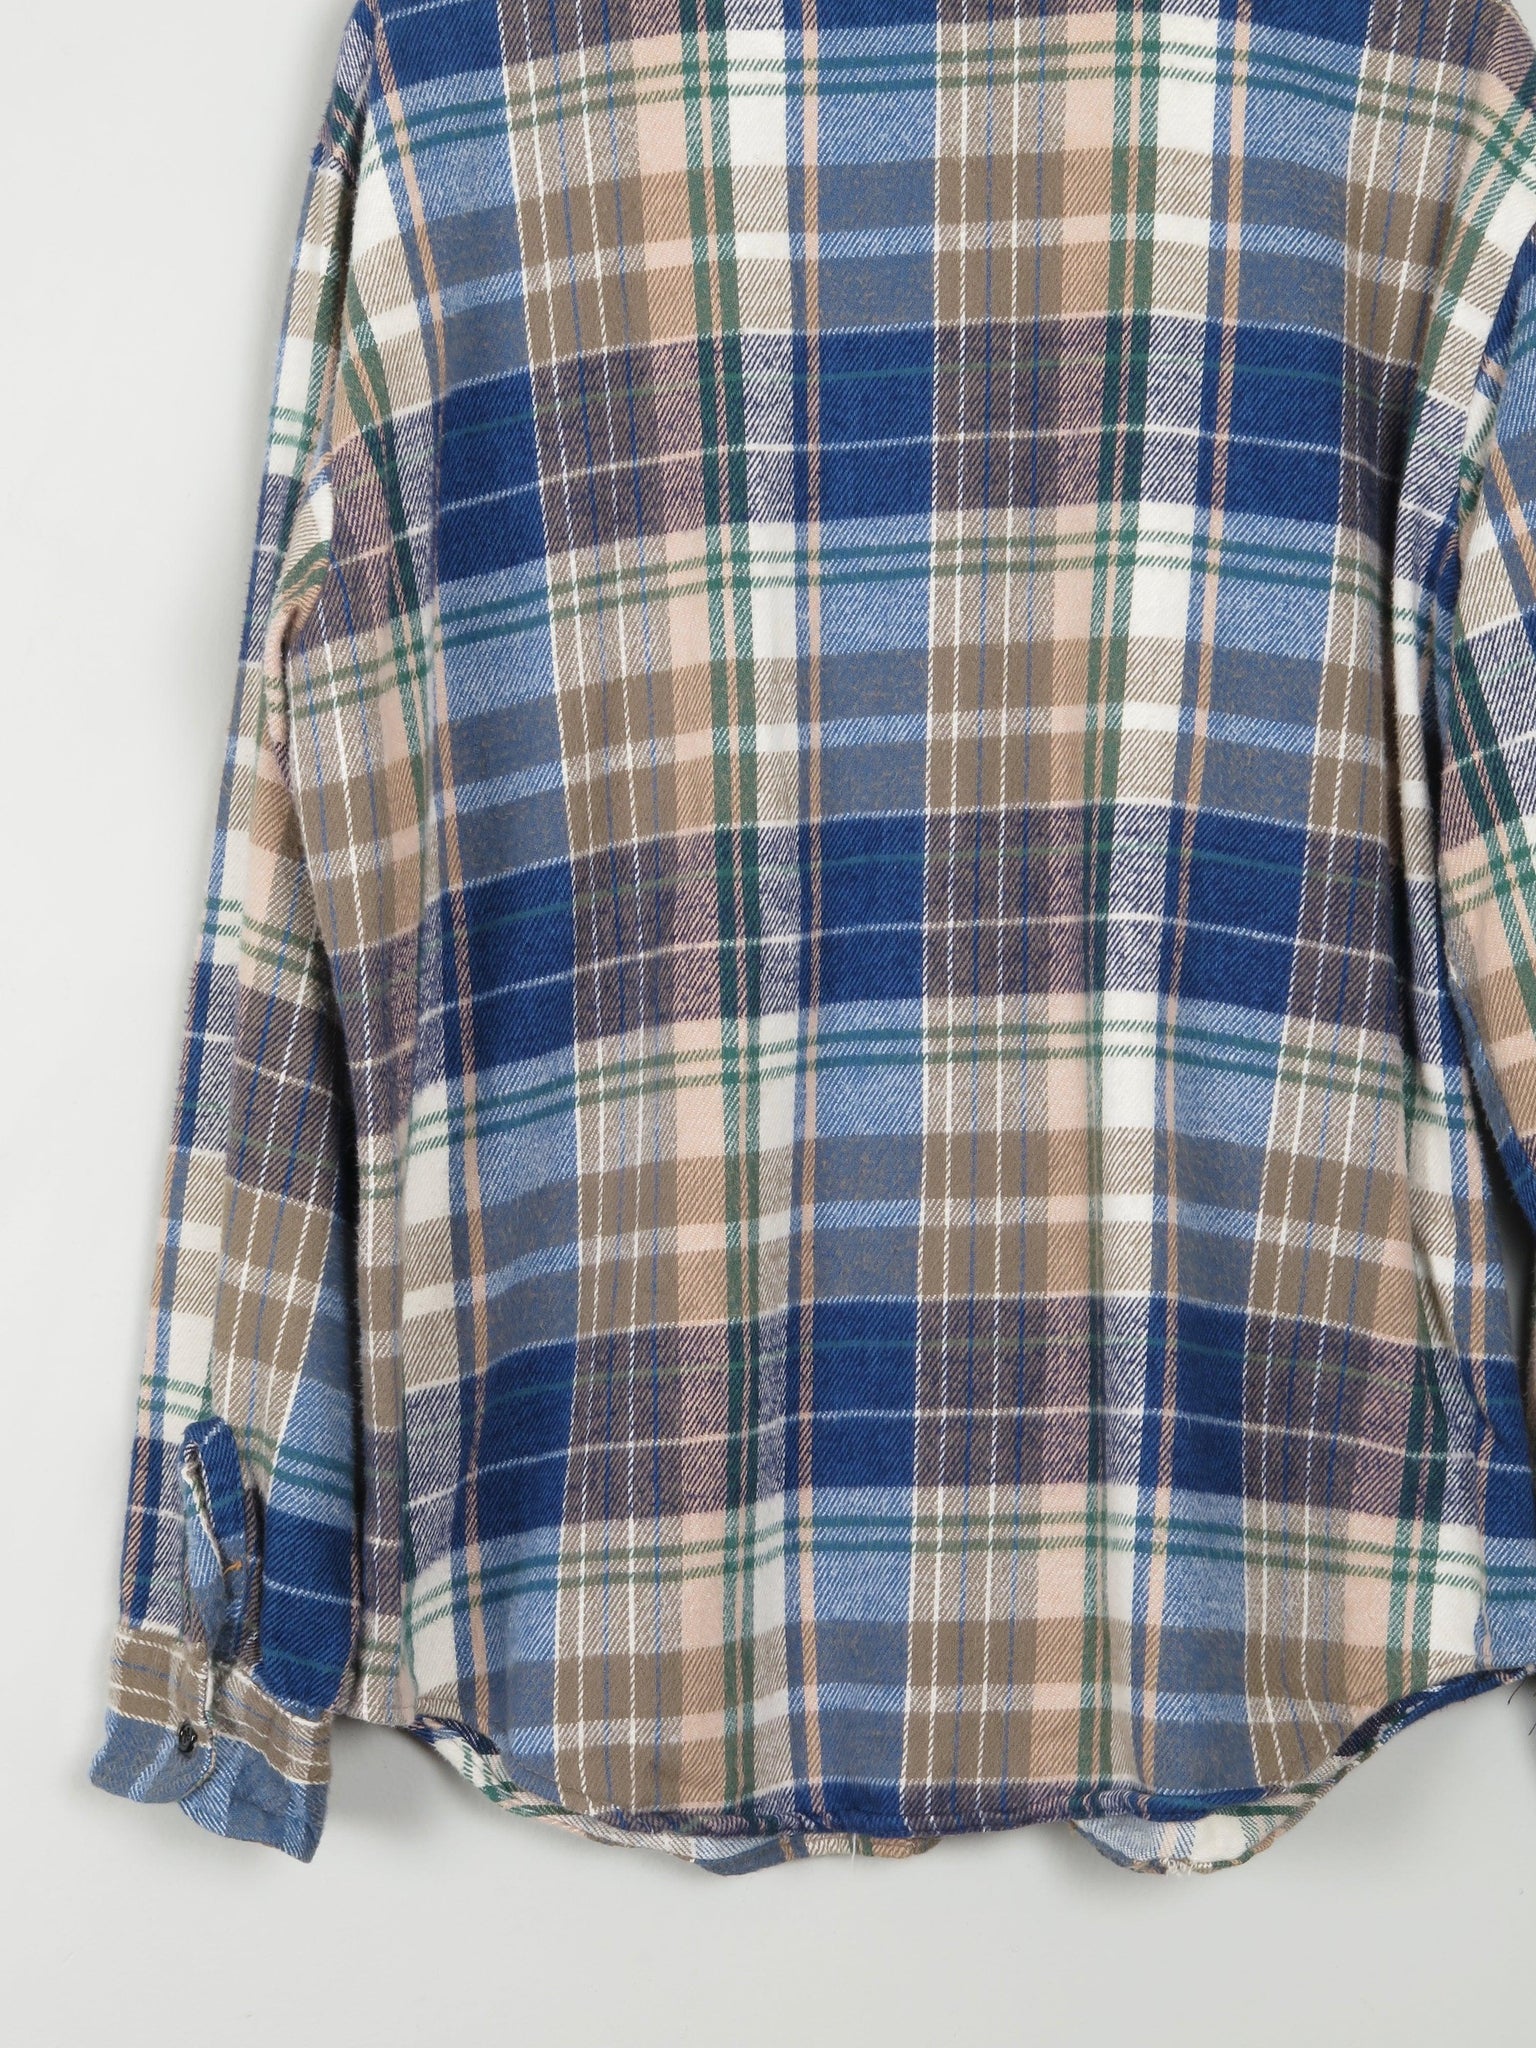 Men's Cream /Blue/Brown/Brown Heavy Quality Vintage Flannel Shirt L - The Harlequin